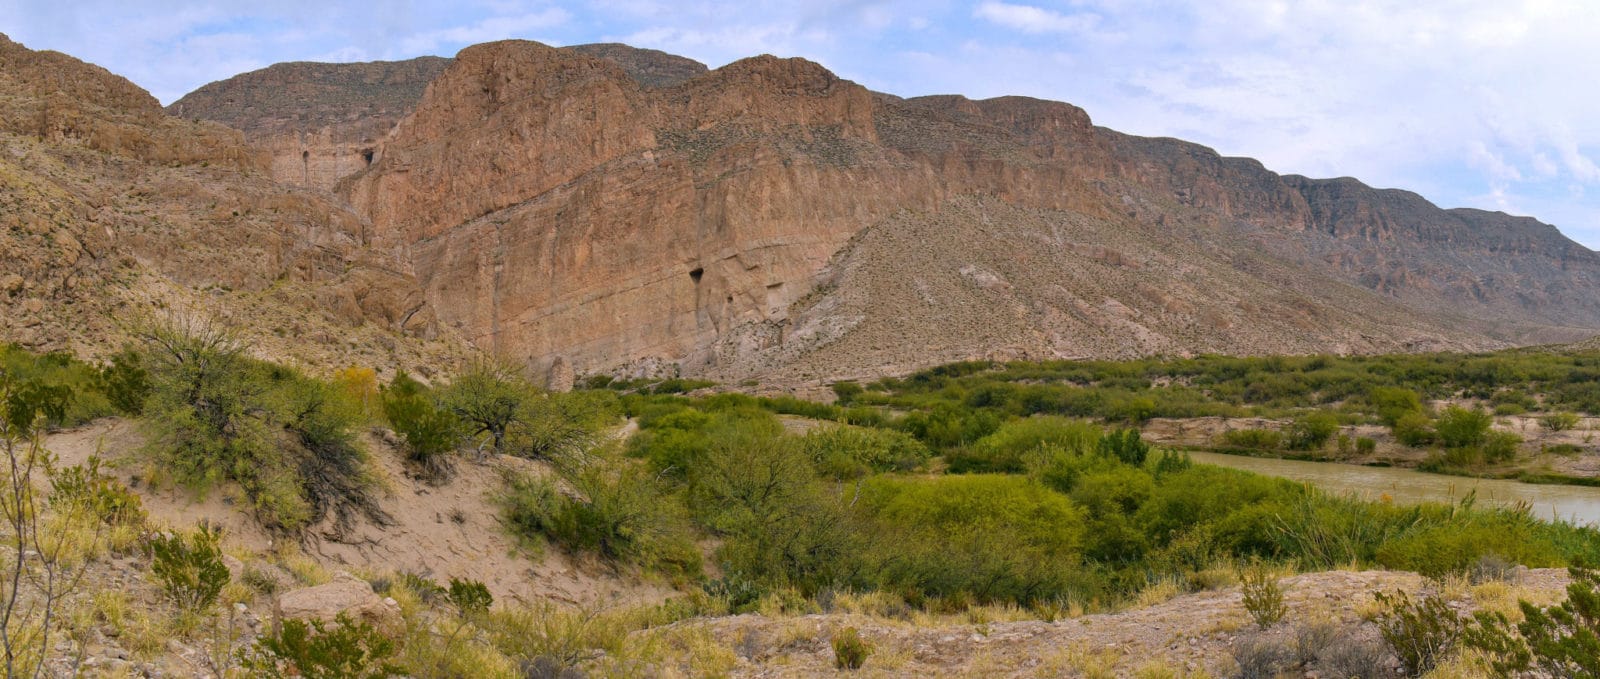 View of the Sierra del Carmen cliffs, and the hidden Boquillas Canyon